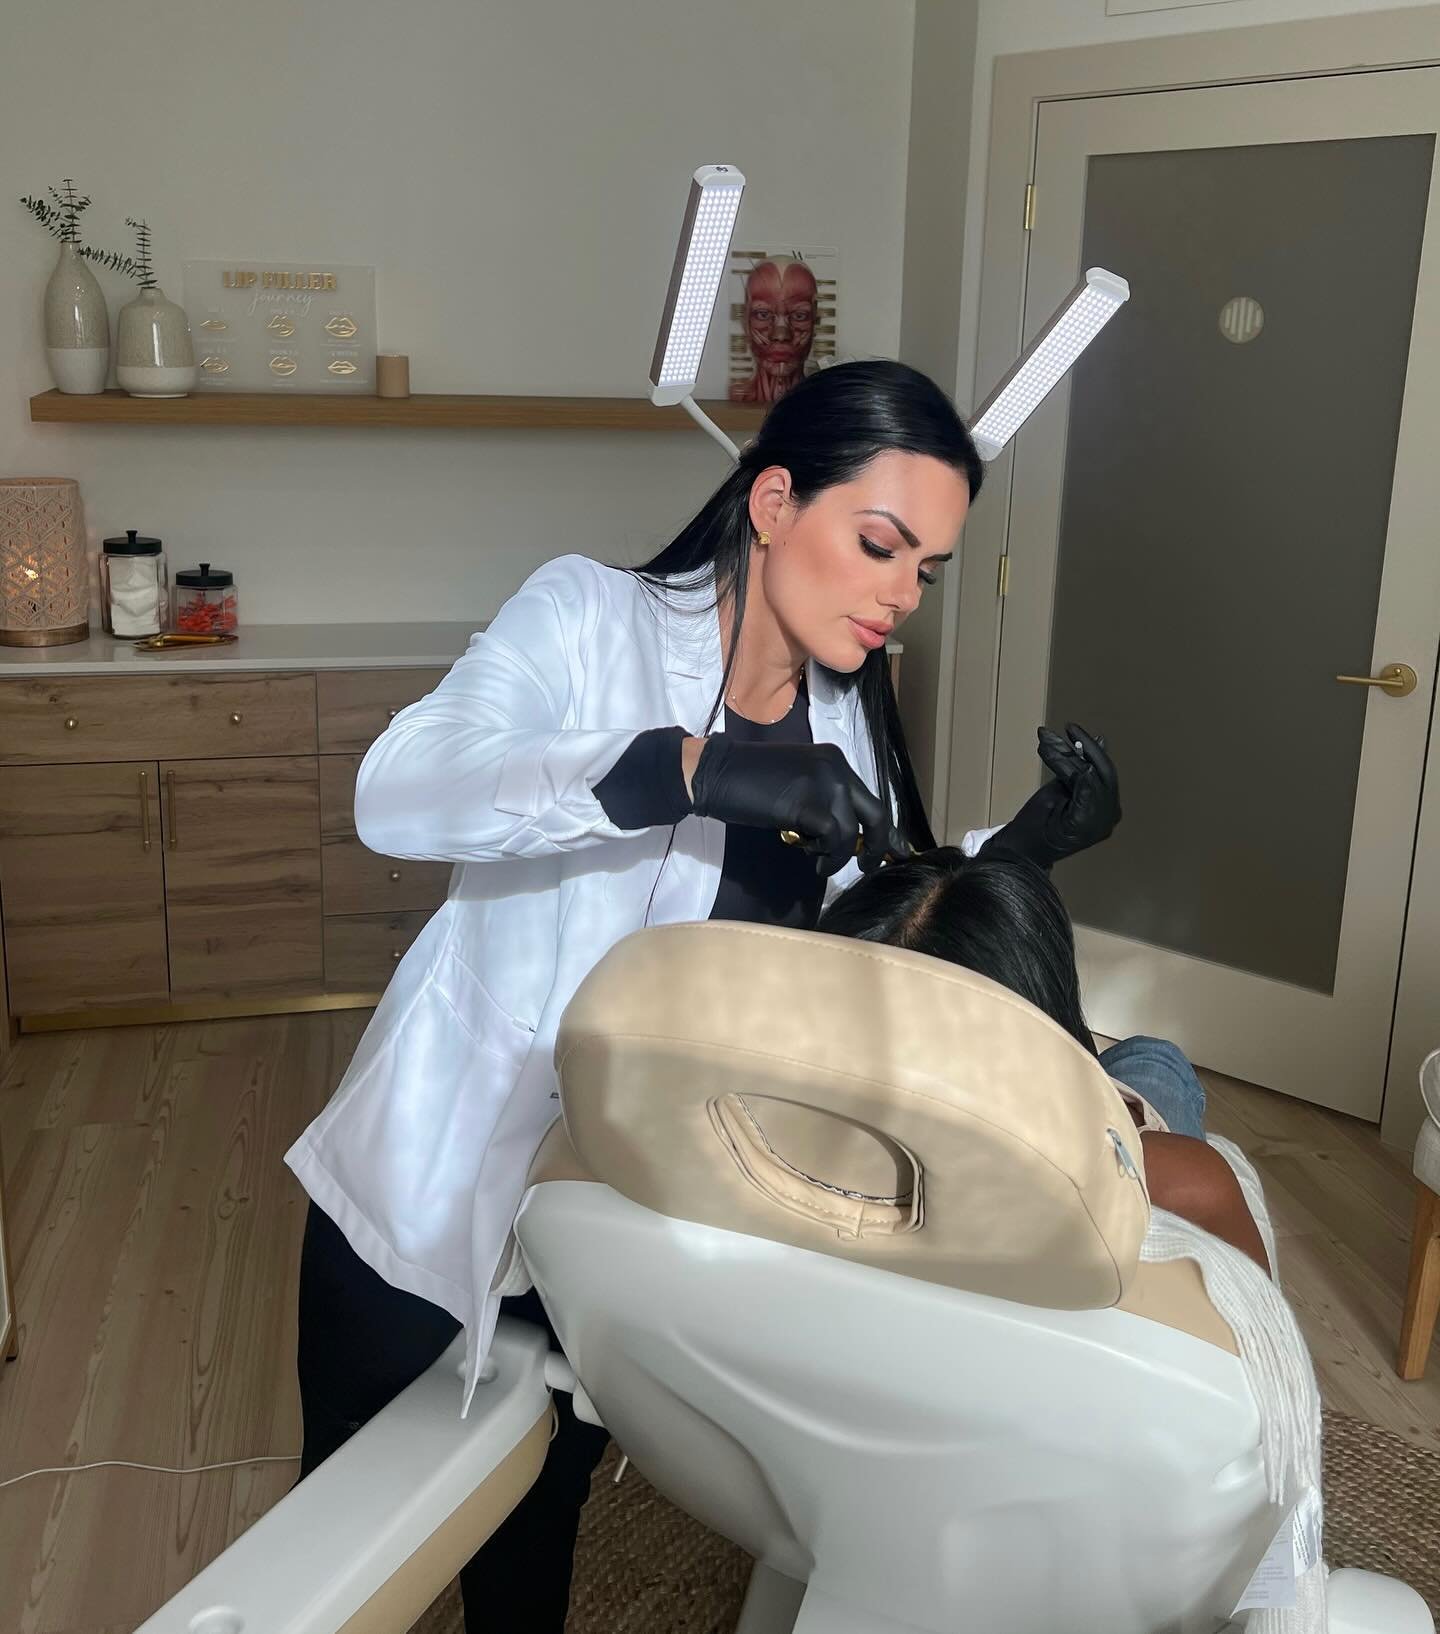 you after your appointment = 🔥🔥🔥
&bull;
&bull;
&bull;
&bull;
&bull;
&bull;
&bull;
&bull;
&bull;
BOOK NOW⬇️
📞 (786)427-9877 call/text
💭DM us on IG
🗓️visit the booking link in our bio 📧info@venusaestheticsmiami.com

#filler #lipfiller #miamilips